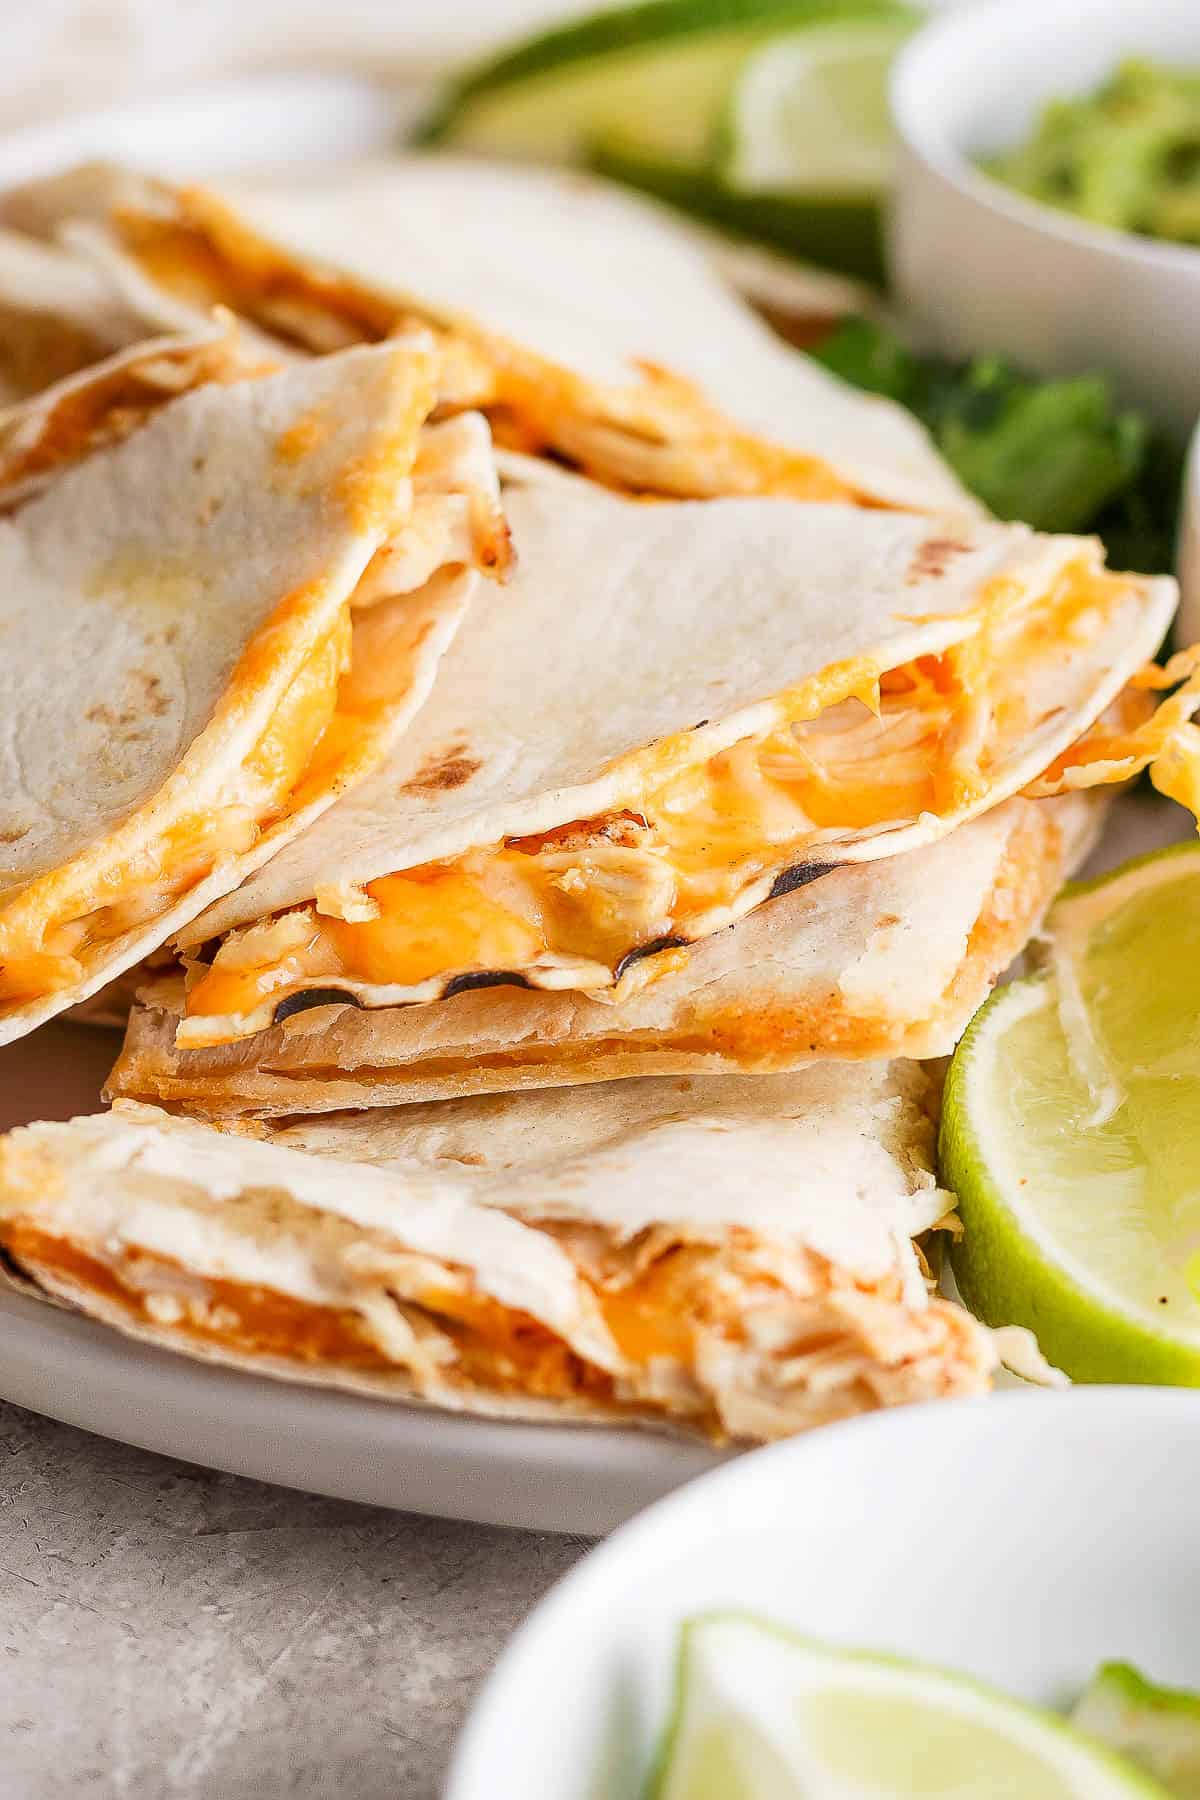 Cheesy air fryer chicken quesadillas cut into triangles and served on a plate.